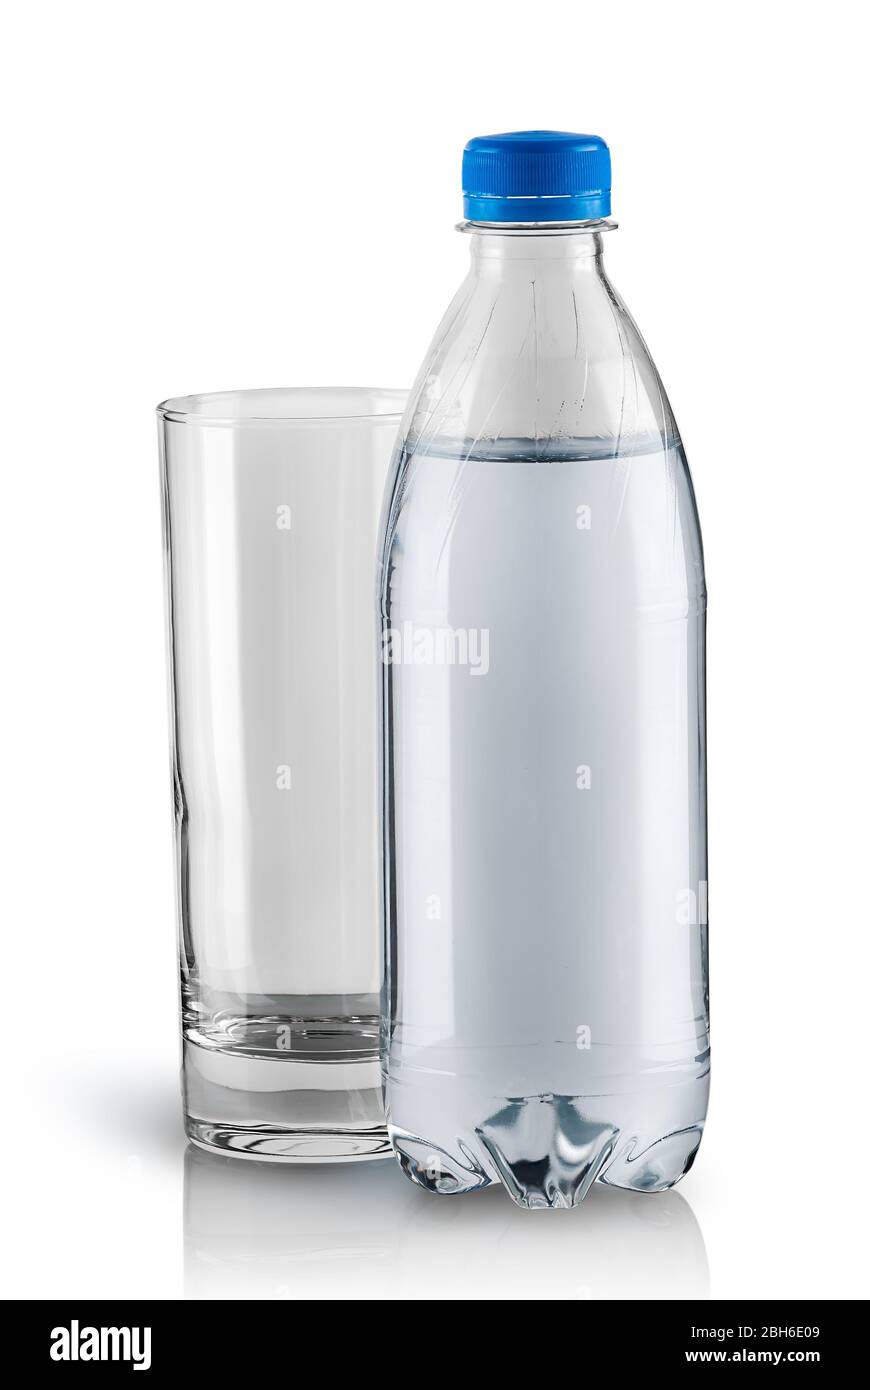 Empty glass and plastic bottle Stock Photo